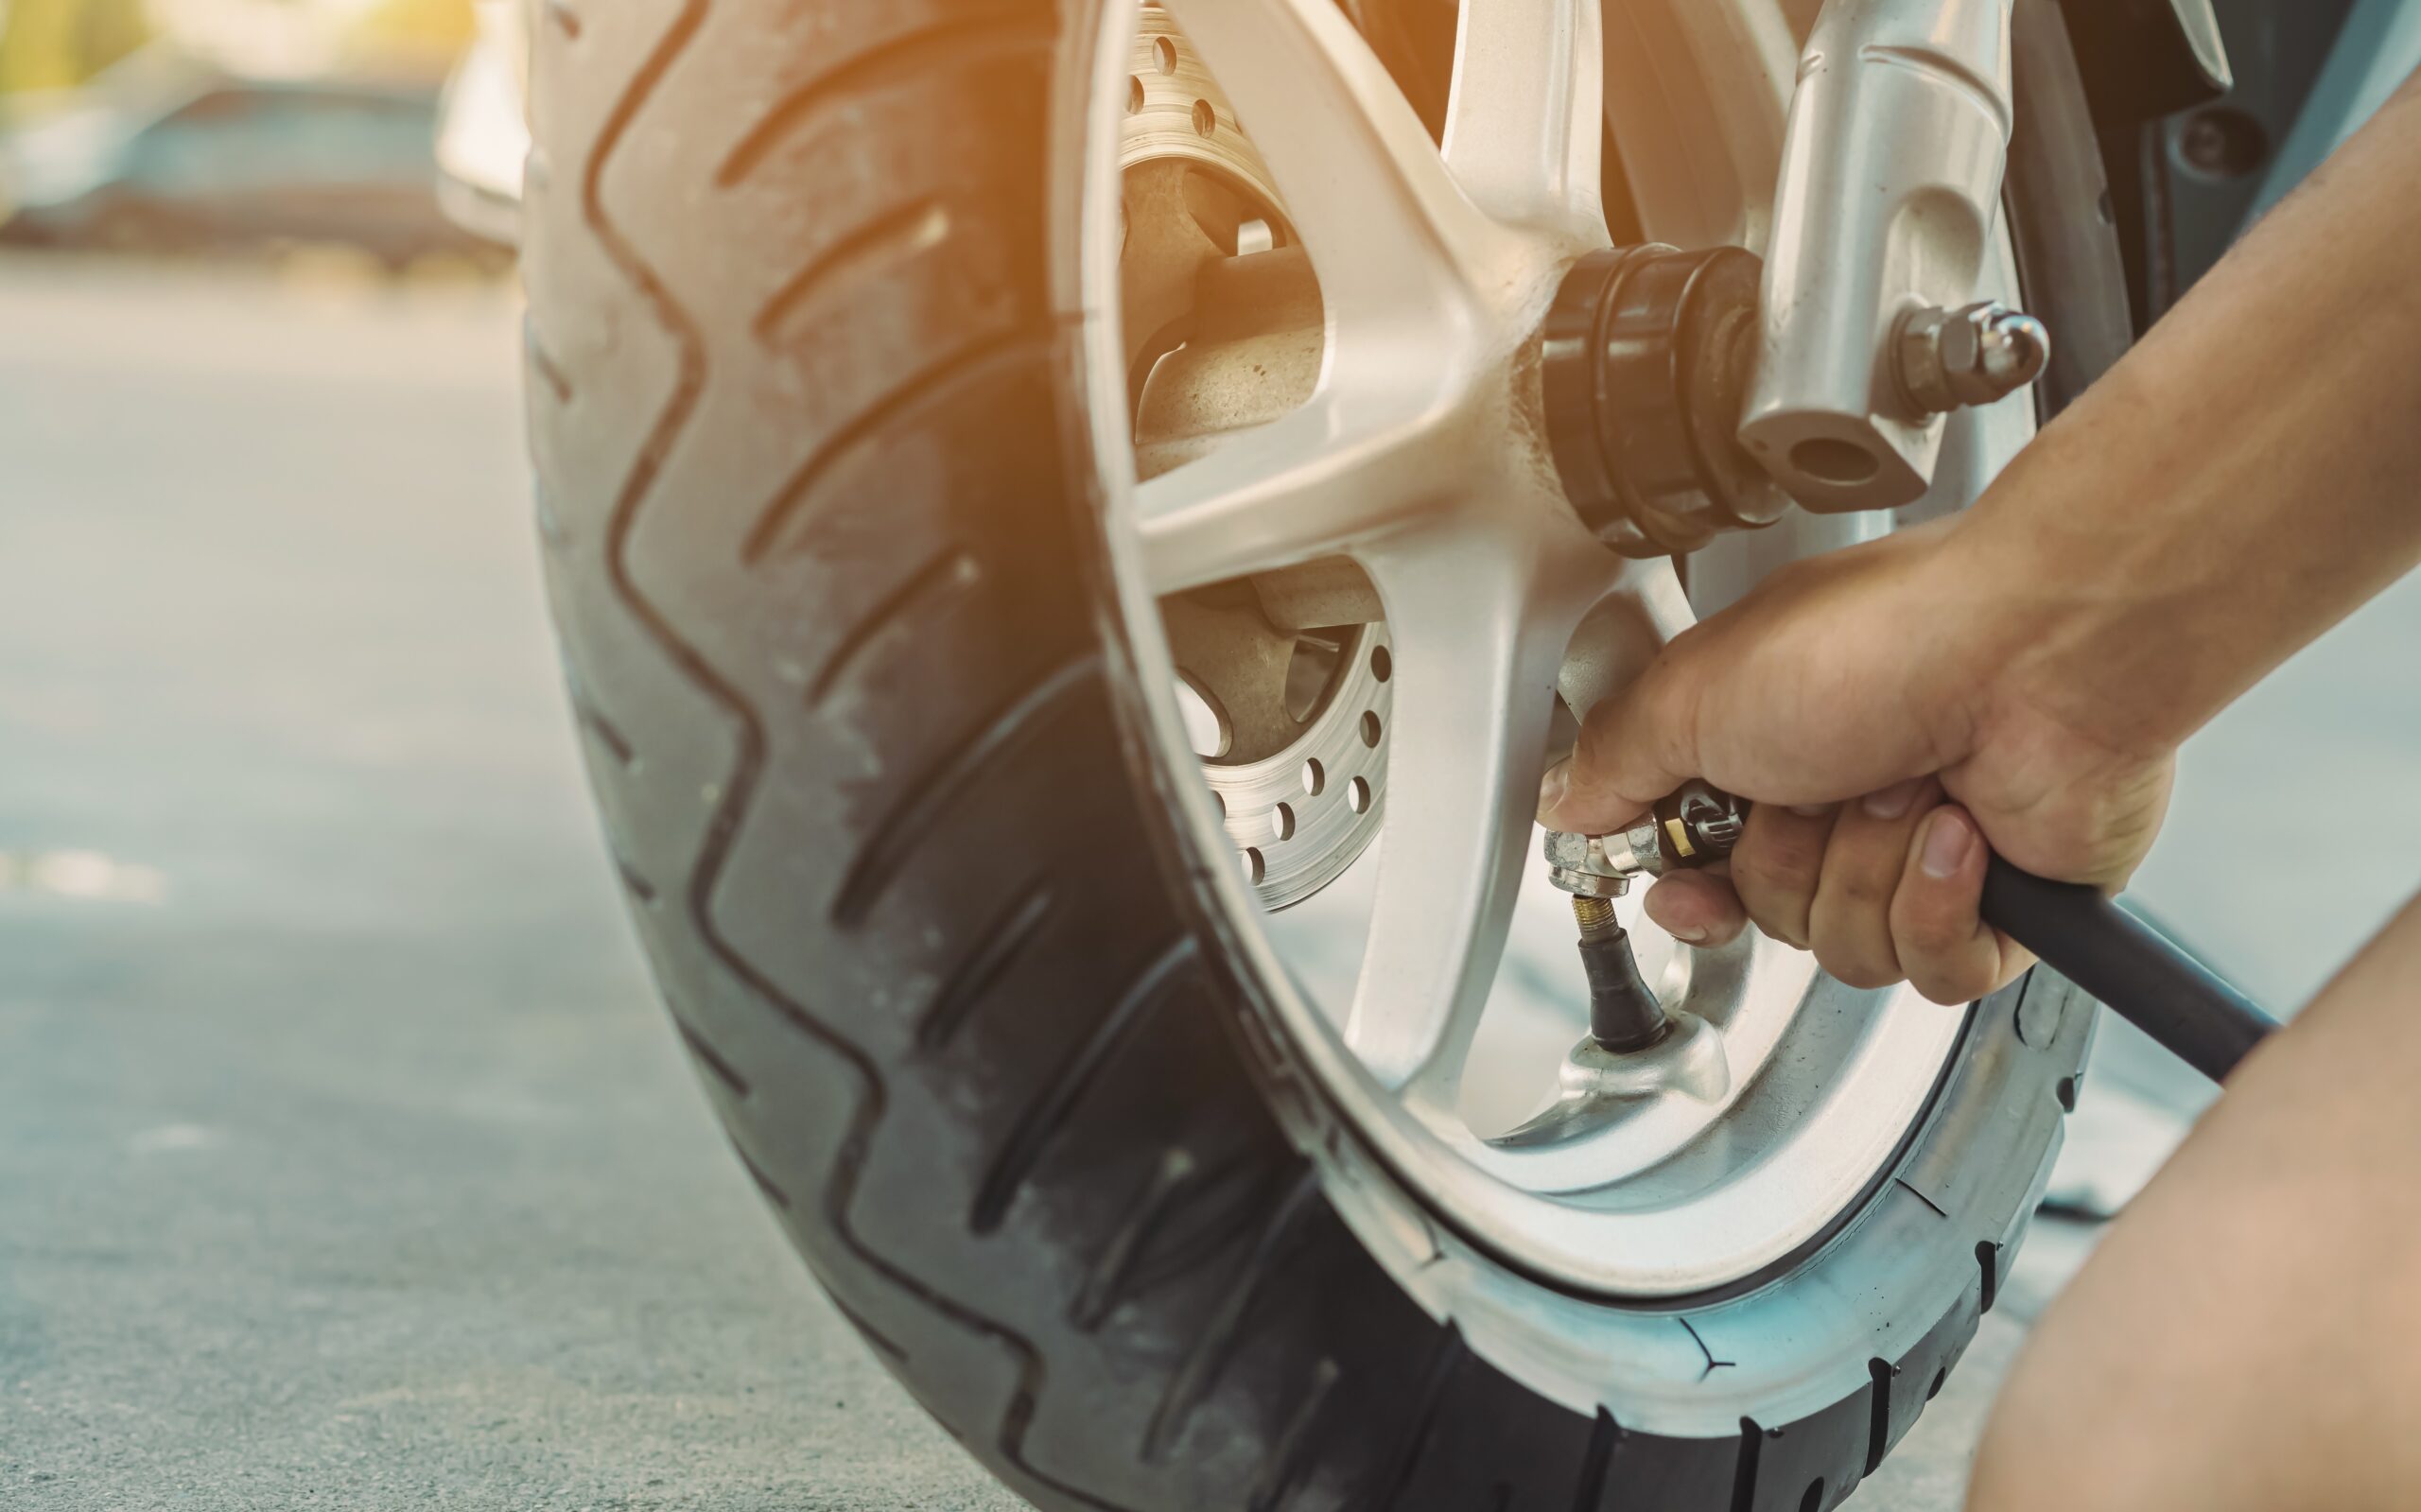 How to Choose the Right Size of Motorcycle Tires for Safety